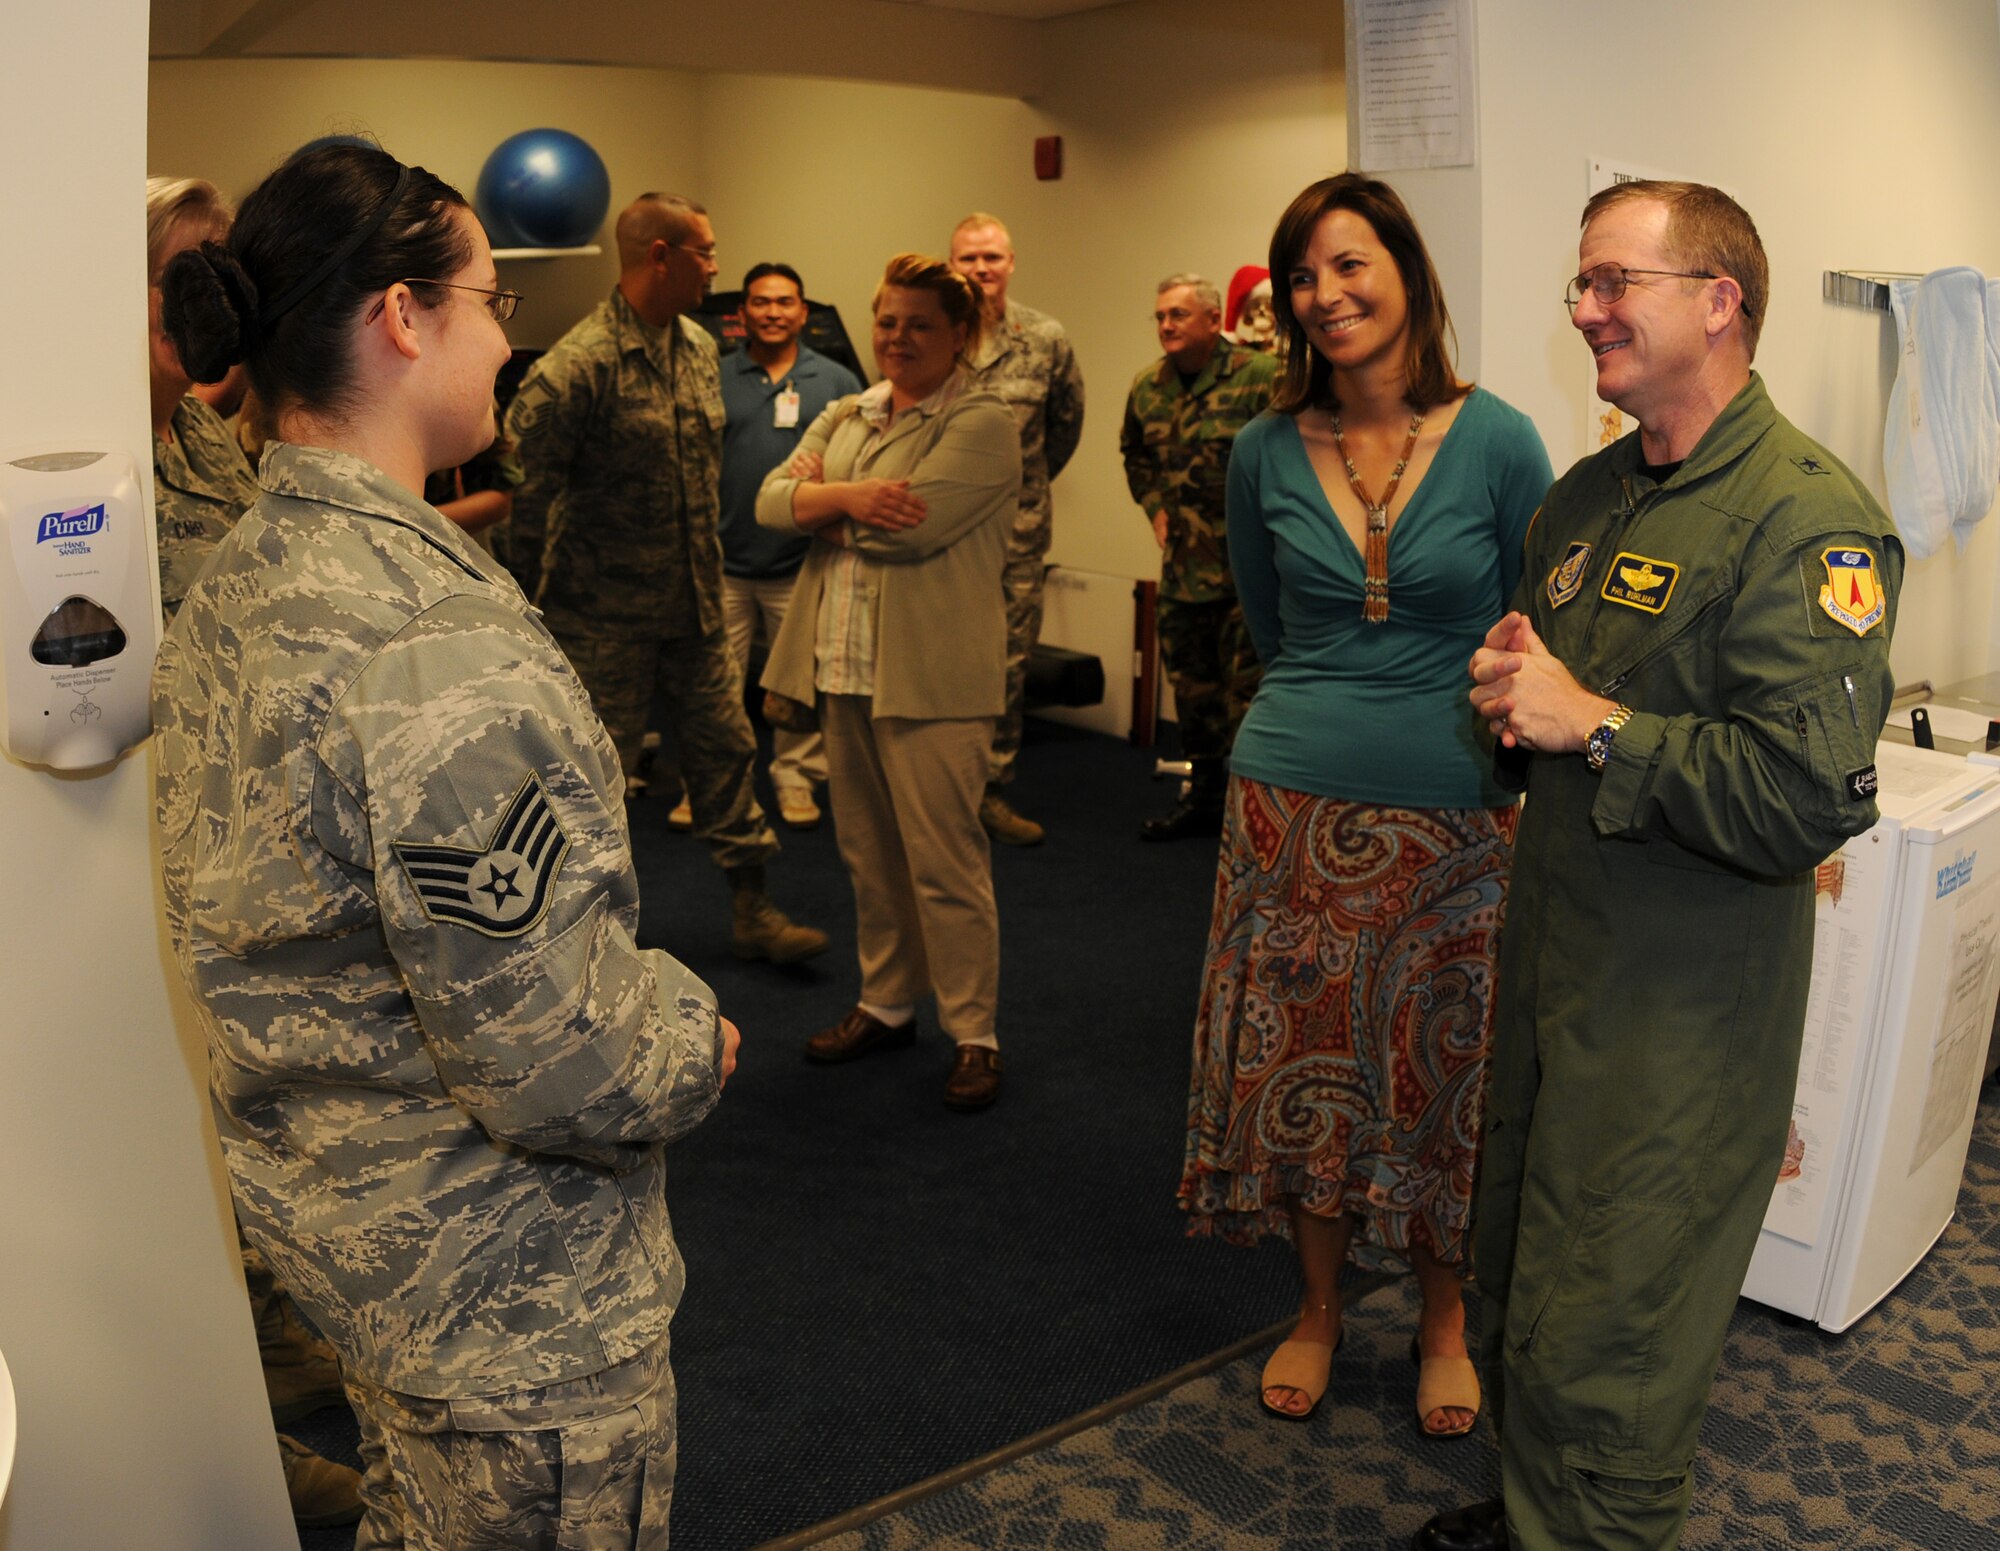 ANDERSEN AIR FORCE BASE, Guam - Staff Sgt. Rebecca Smen (left), of the 36th Medical Operations Squadron, answers questions from Brig. Gen. Phil Ruhlman, 36th Wing commander, and his wife Lina about the newly opened physical therapy clinic at the Health and Wellness Center Dec. 11.  Sergeant Smen is one of two physical therapy technicians who work at the new facility on Andersen. (U.S. Air Force photo by Senior Airman Jonathan Hart)